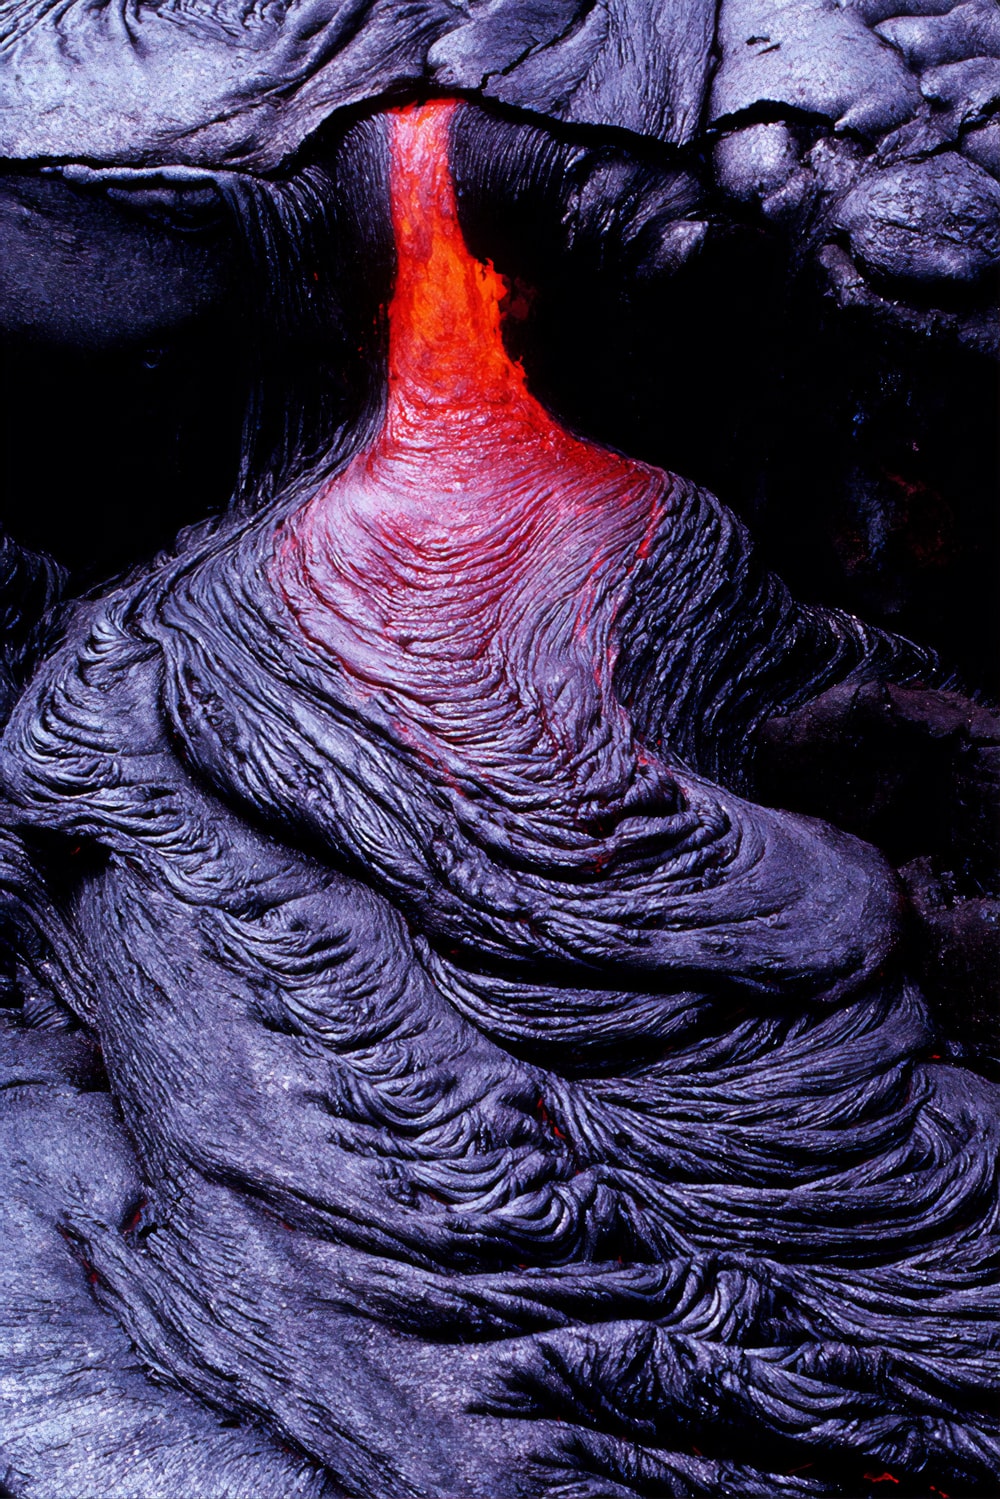 Lava Wallpapers